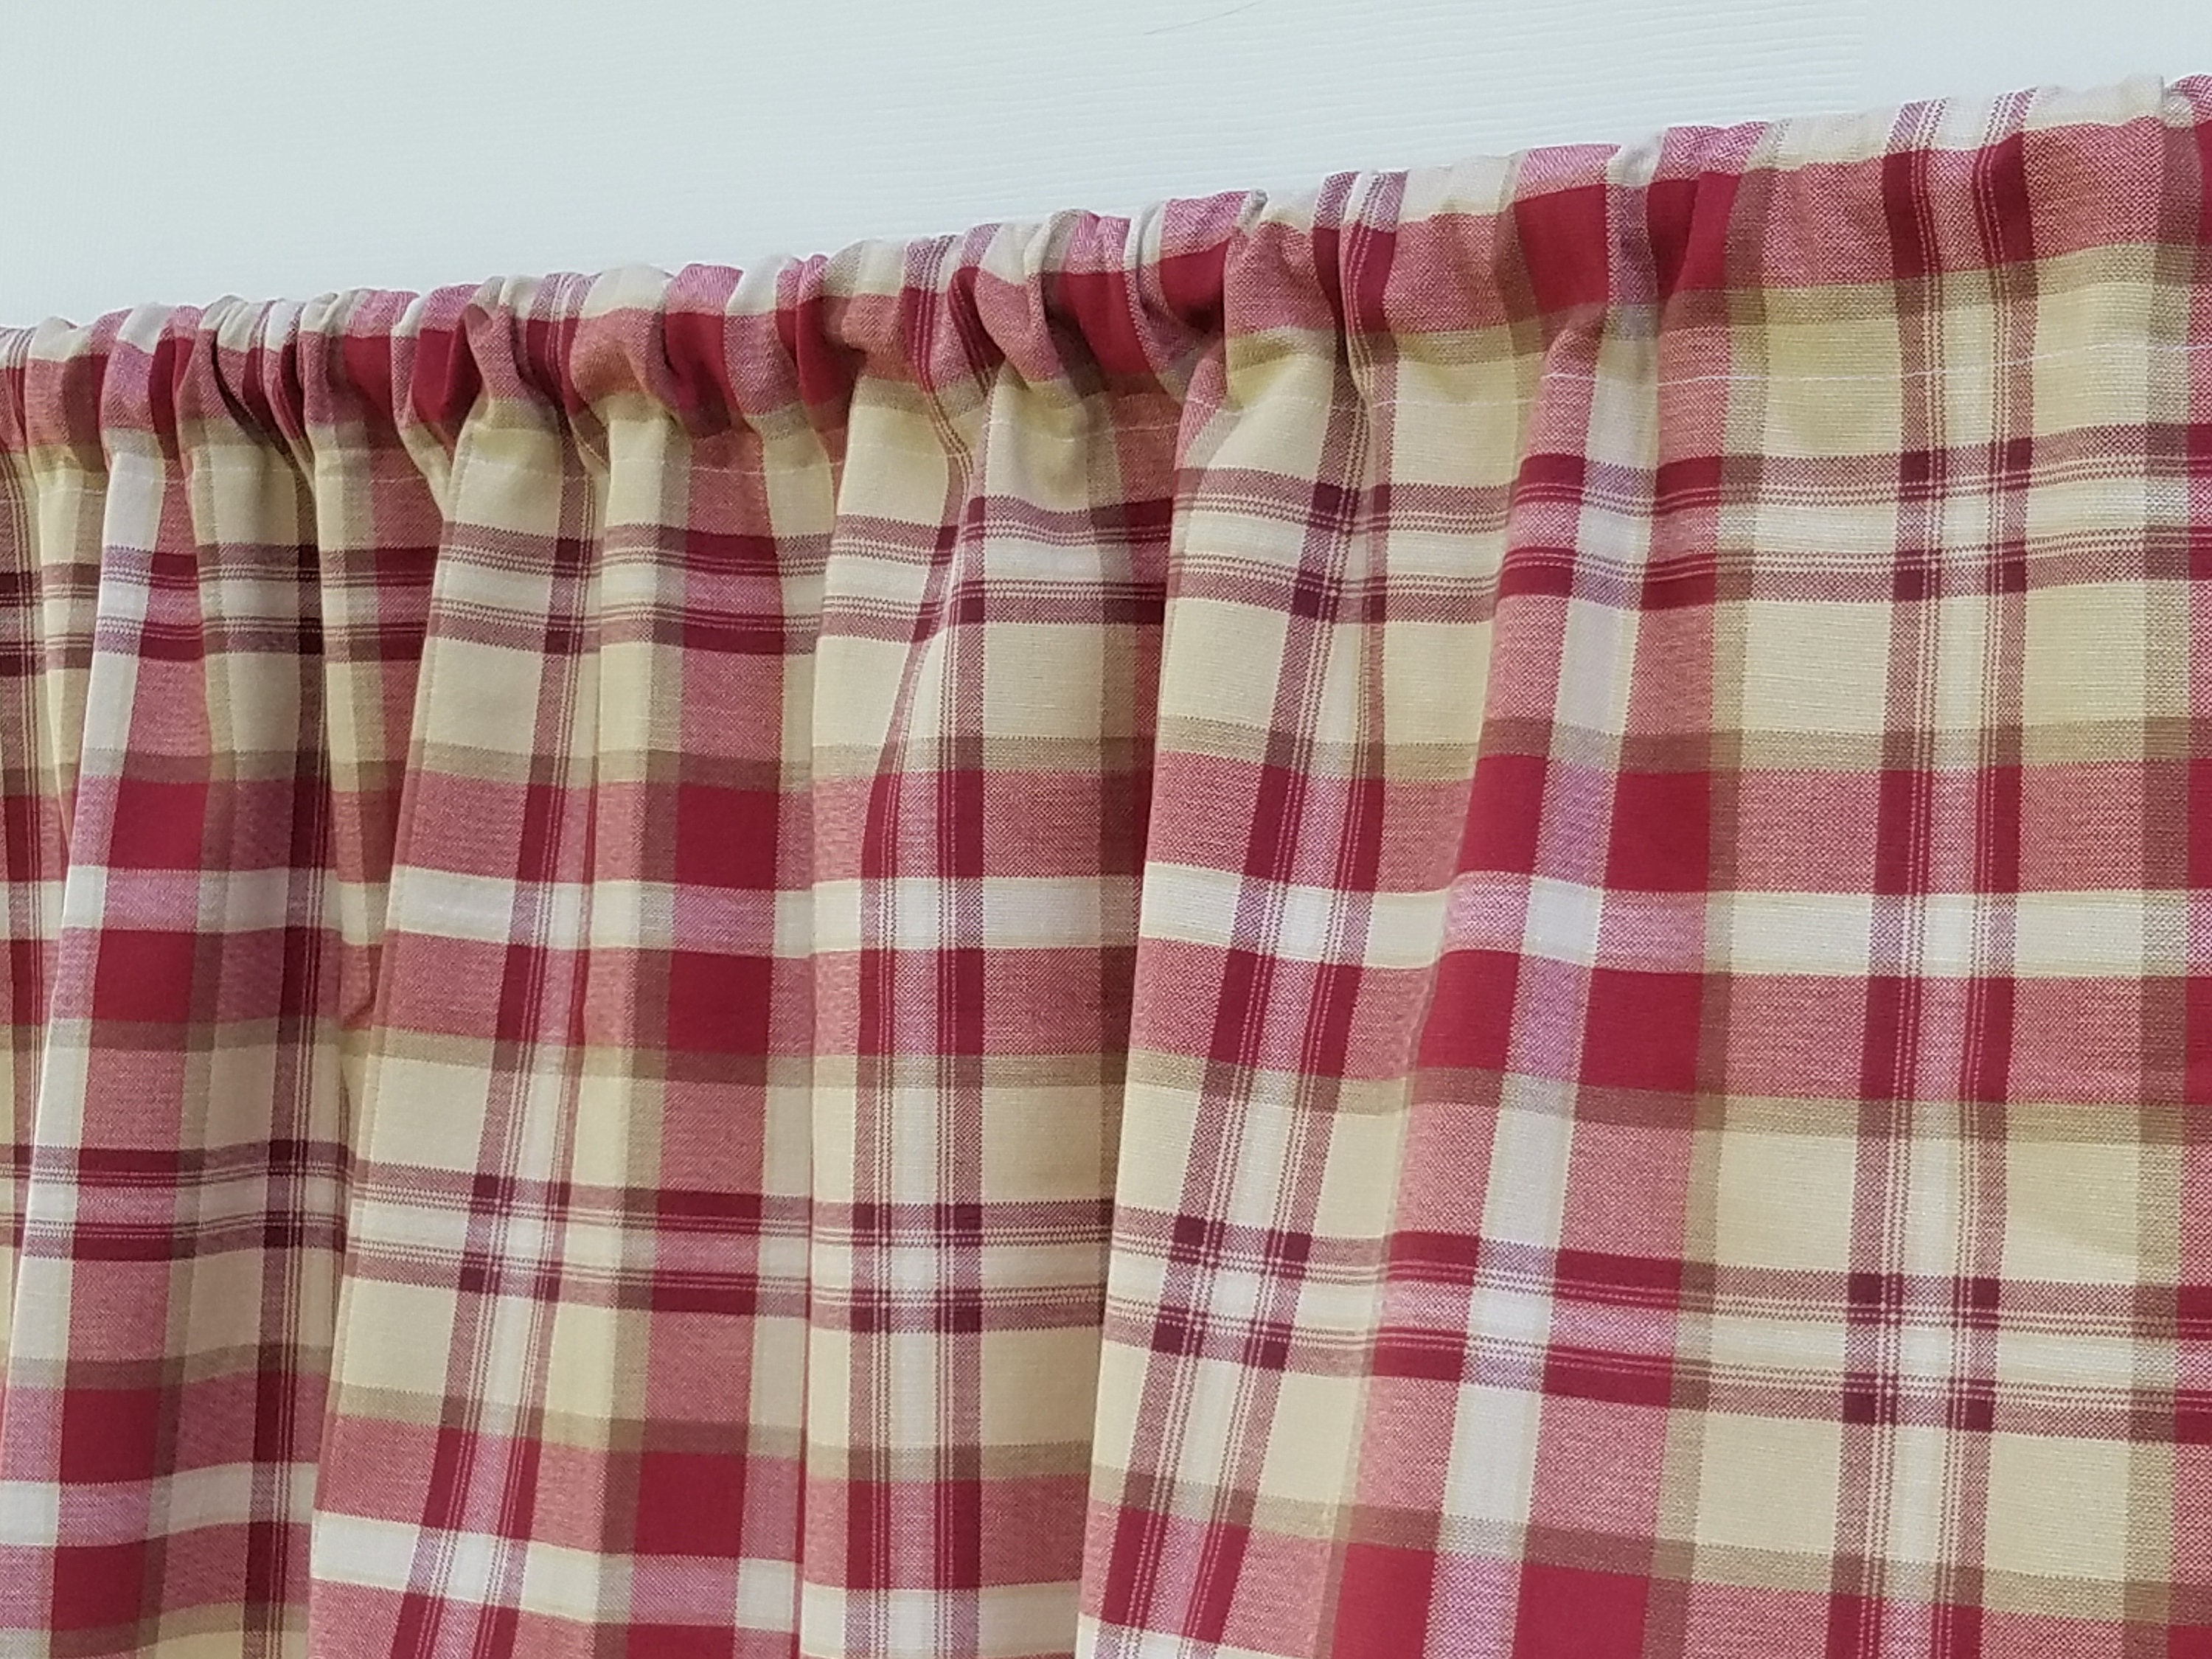 Gingham Plaid Curtain Red Linen Bathroom Bedroom Kitchen - Etsy